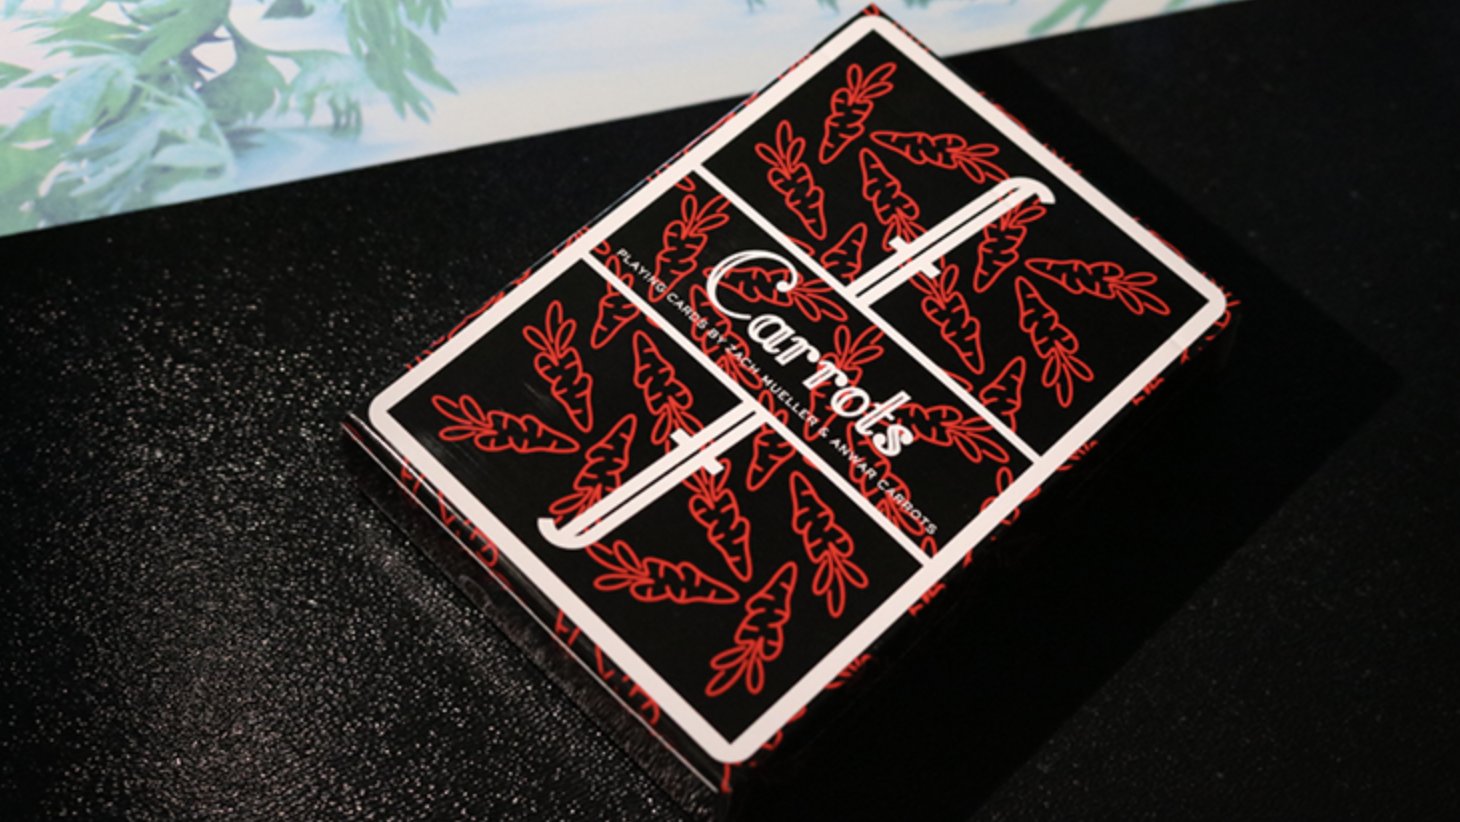 Playing cards at Global Magic shop, shipping worldwide based in Australia. we have a wide range of playing cards from bicycle cards to fontaine.